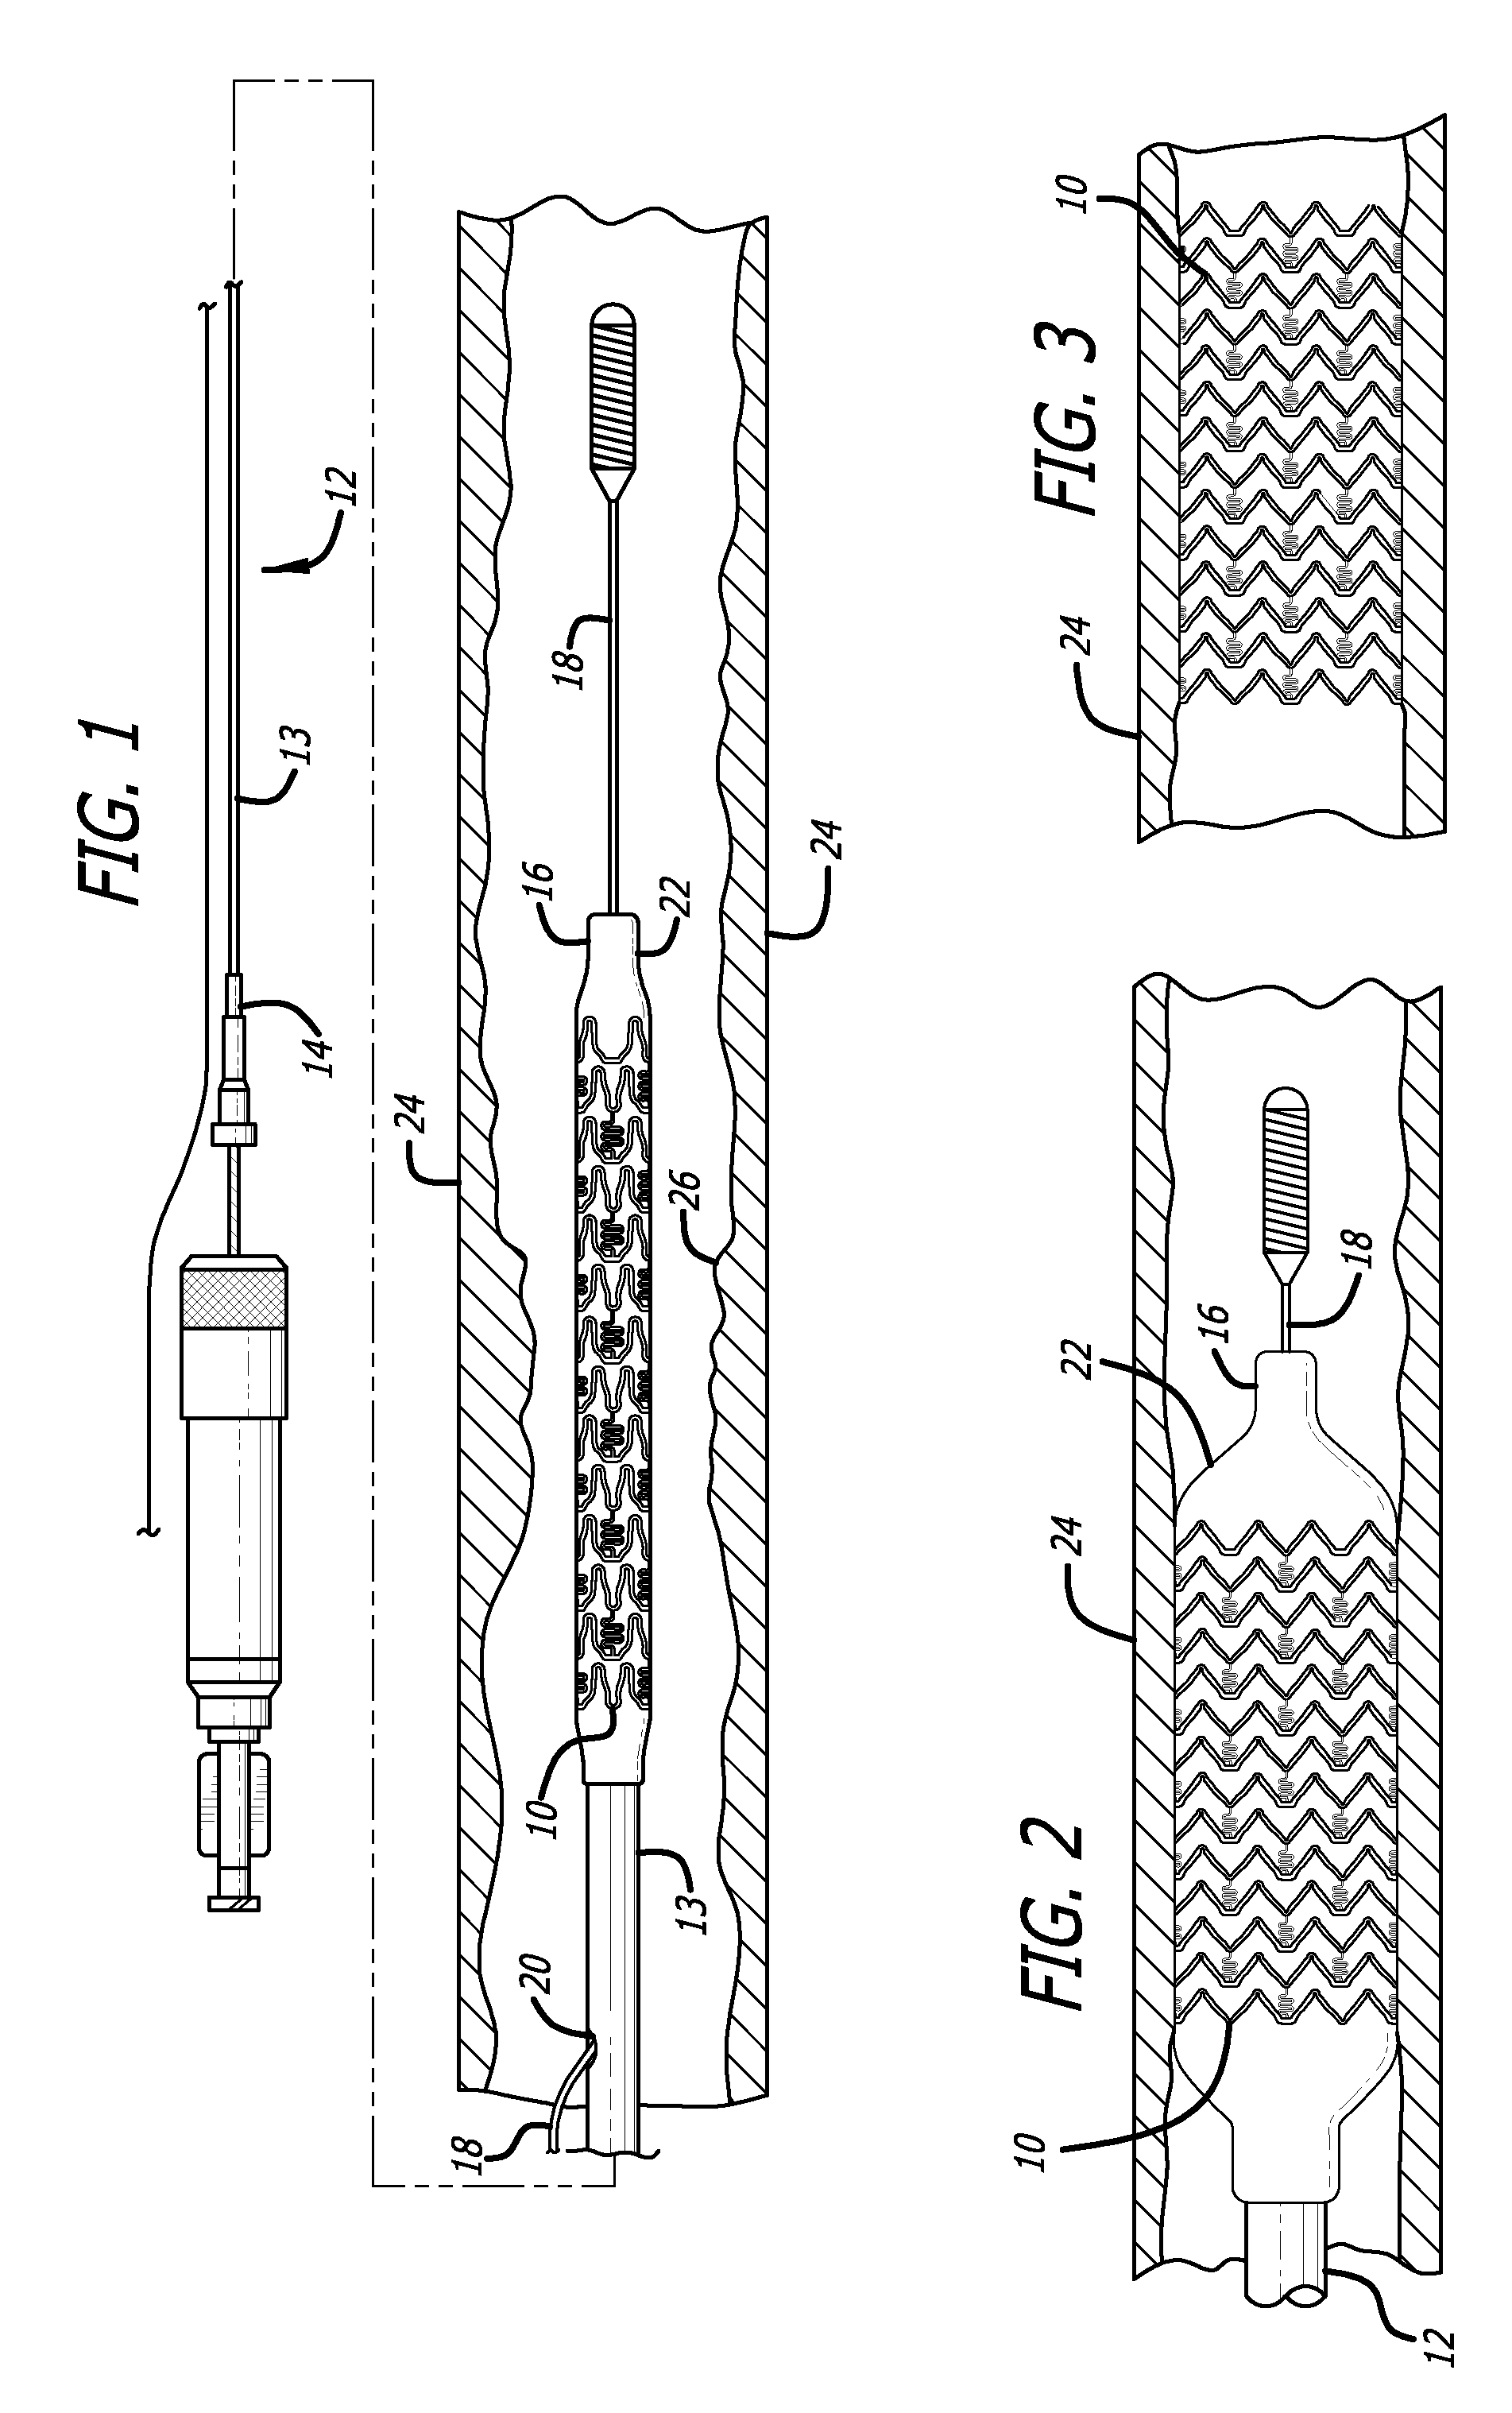 Electrochemical formation of foil-shaped stent struts